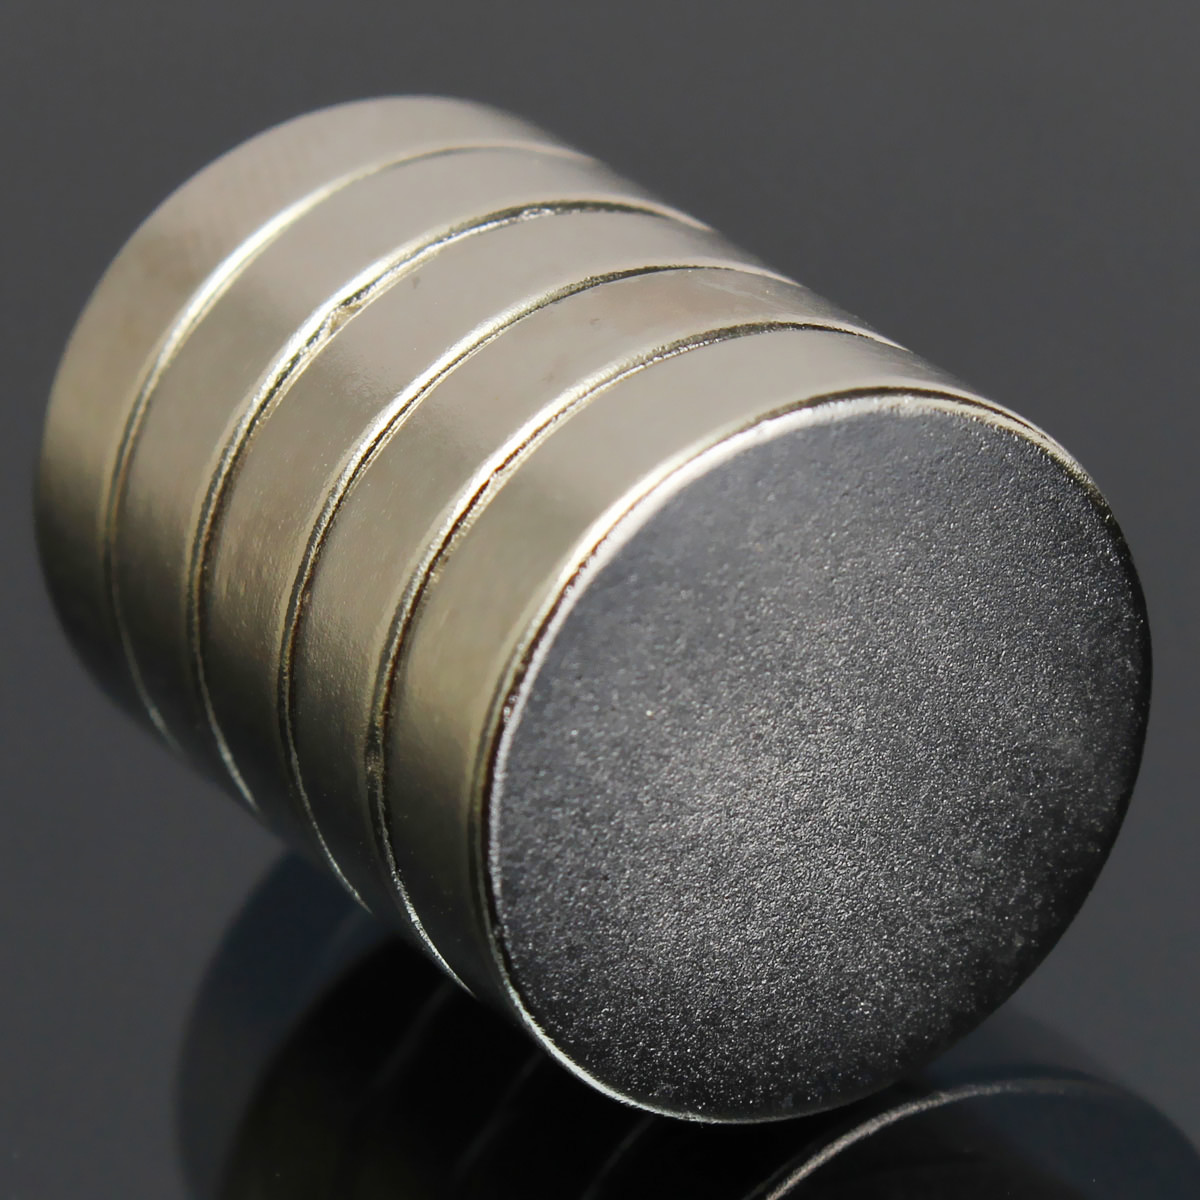 

5pcs N50 20 x 5mm Strong Cylinder Round Magnets Rare Earth Neodymium Magnets